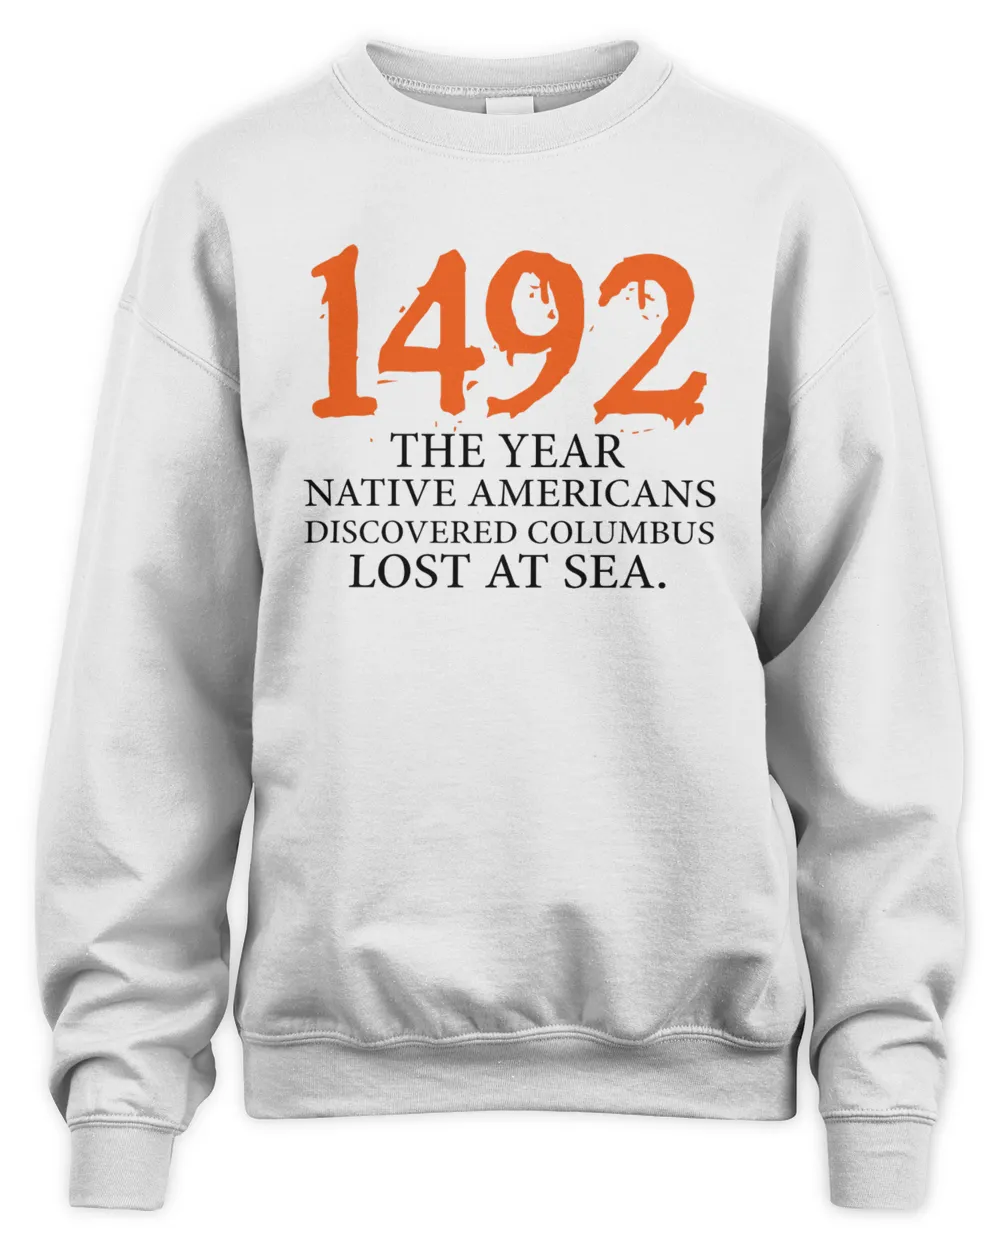 1492 The Year Native Americans Discovered Columbus Lost At Sea Sweatshirt